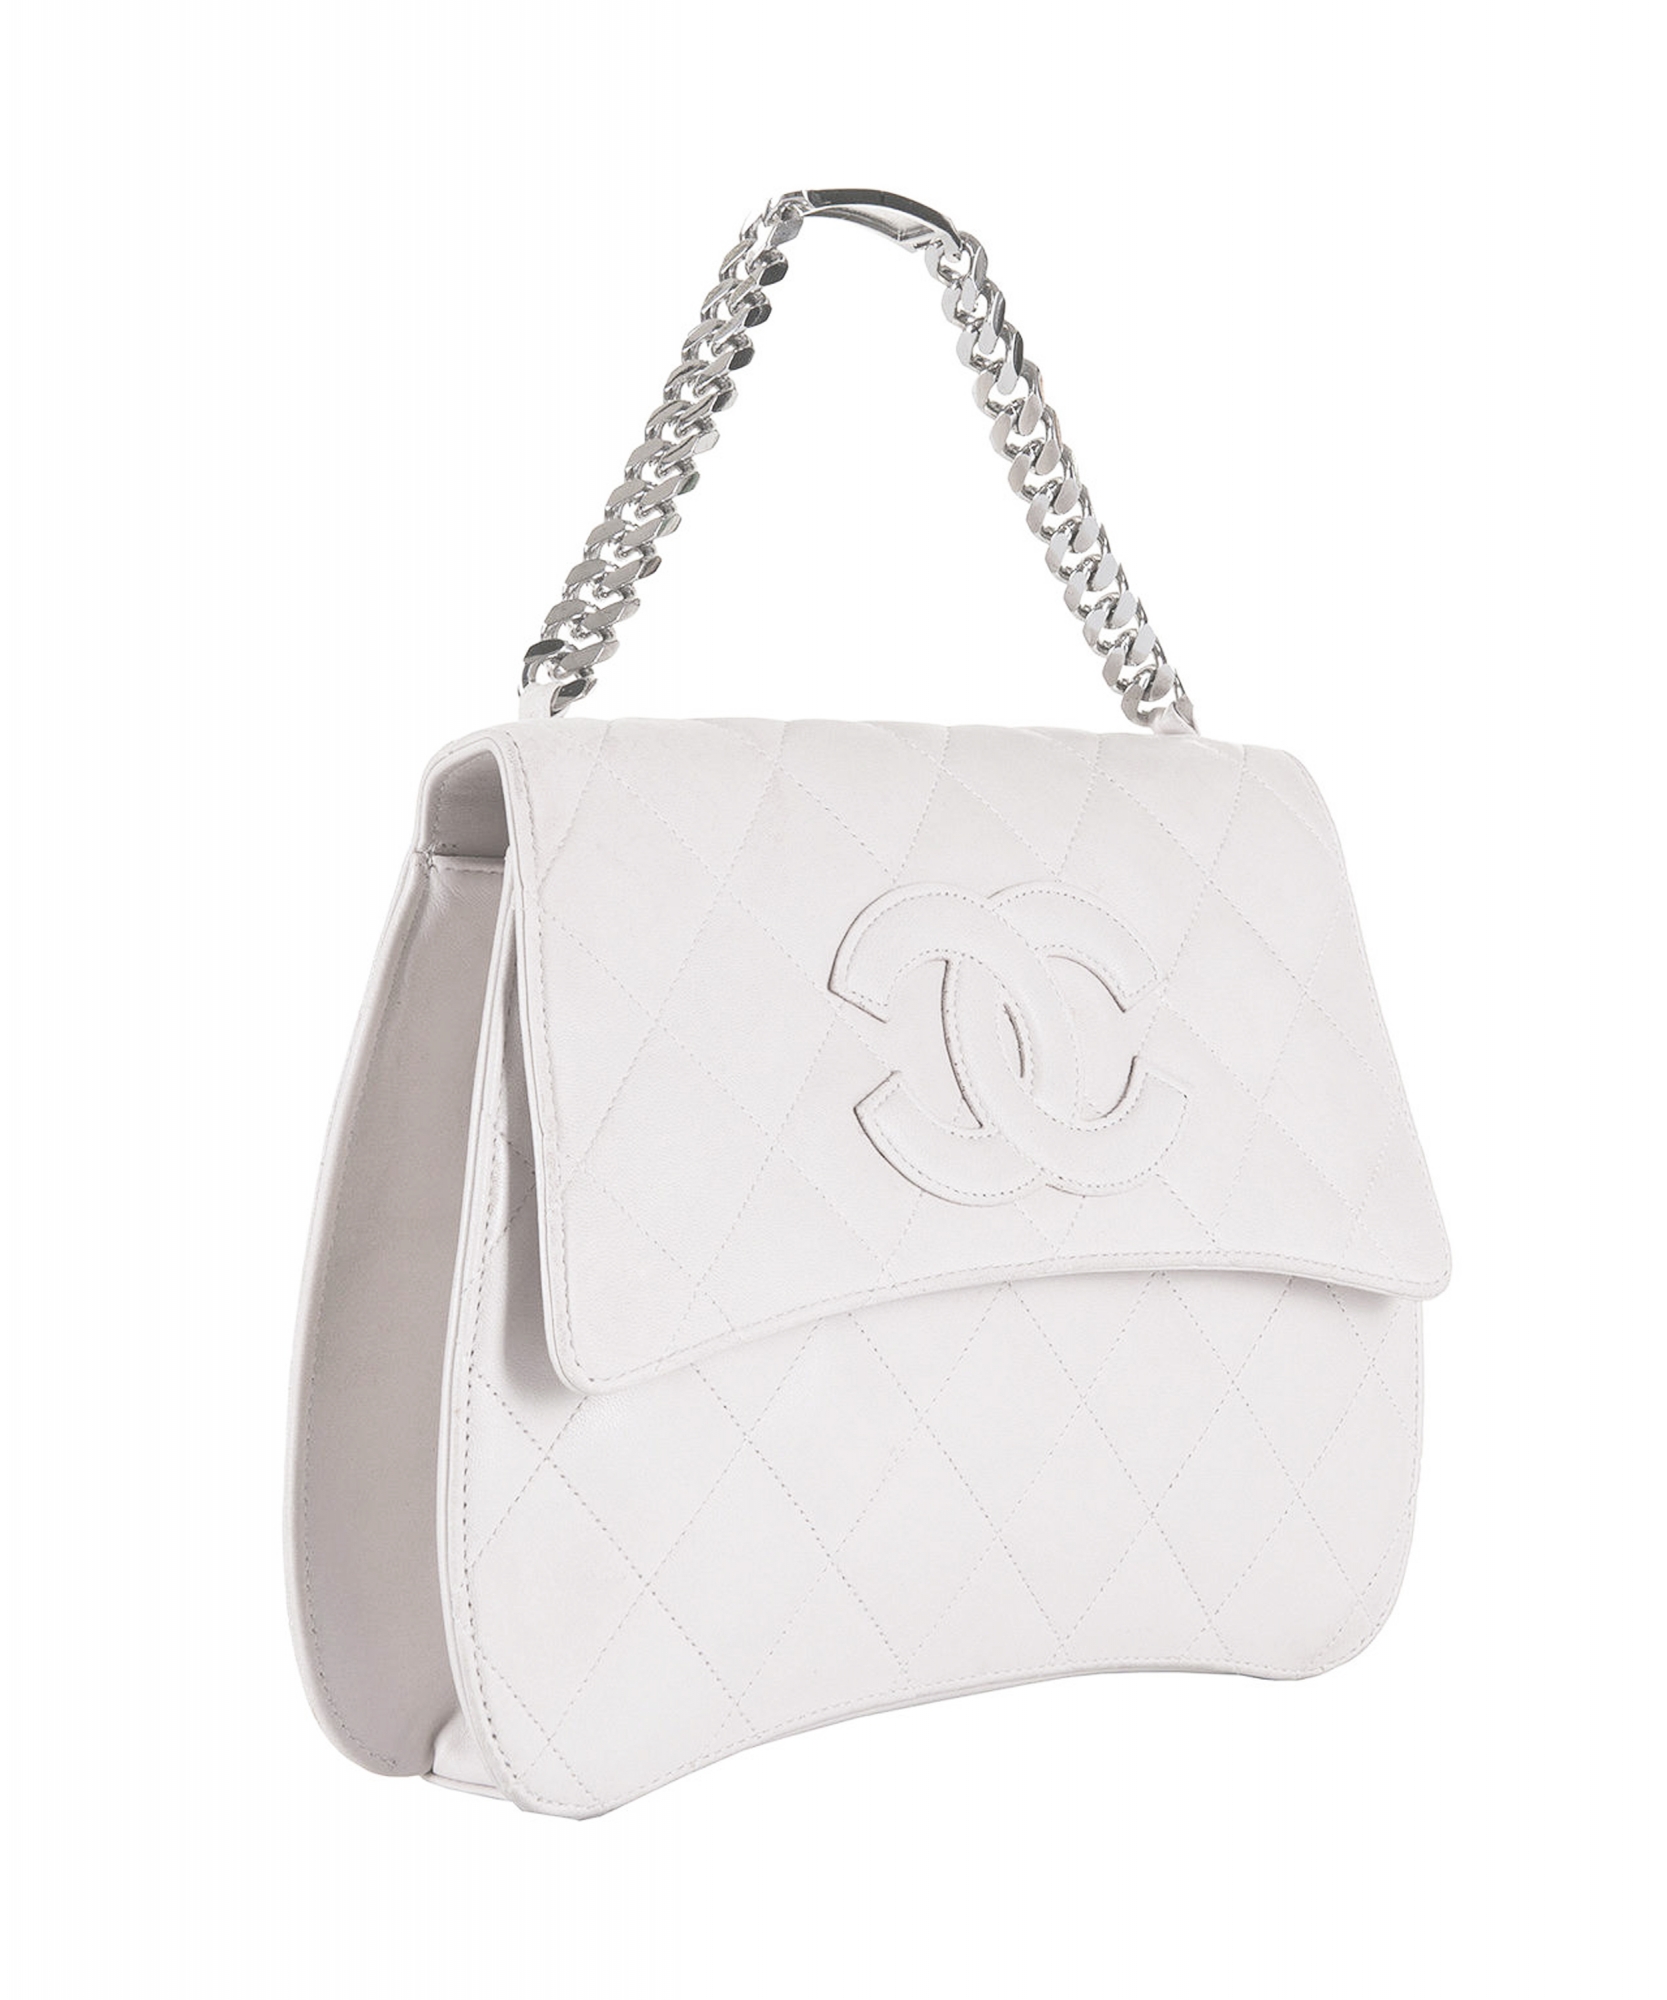 Chanel Backpack White Price :: Keweenaw Bay Indian Community